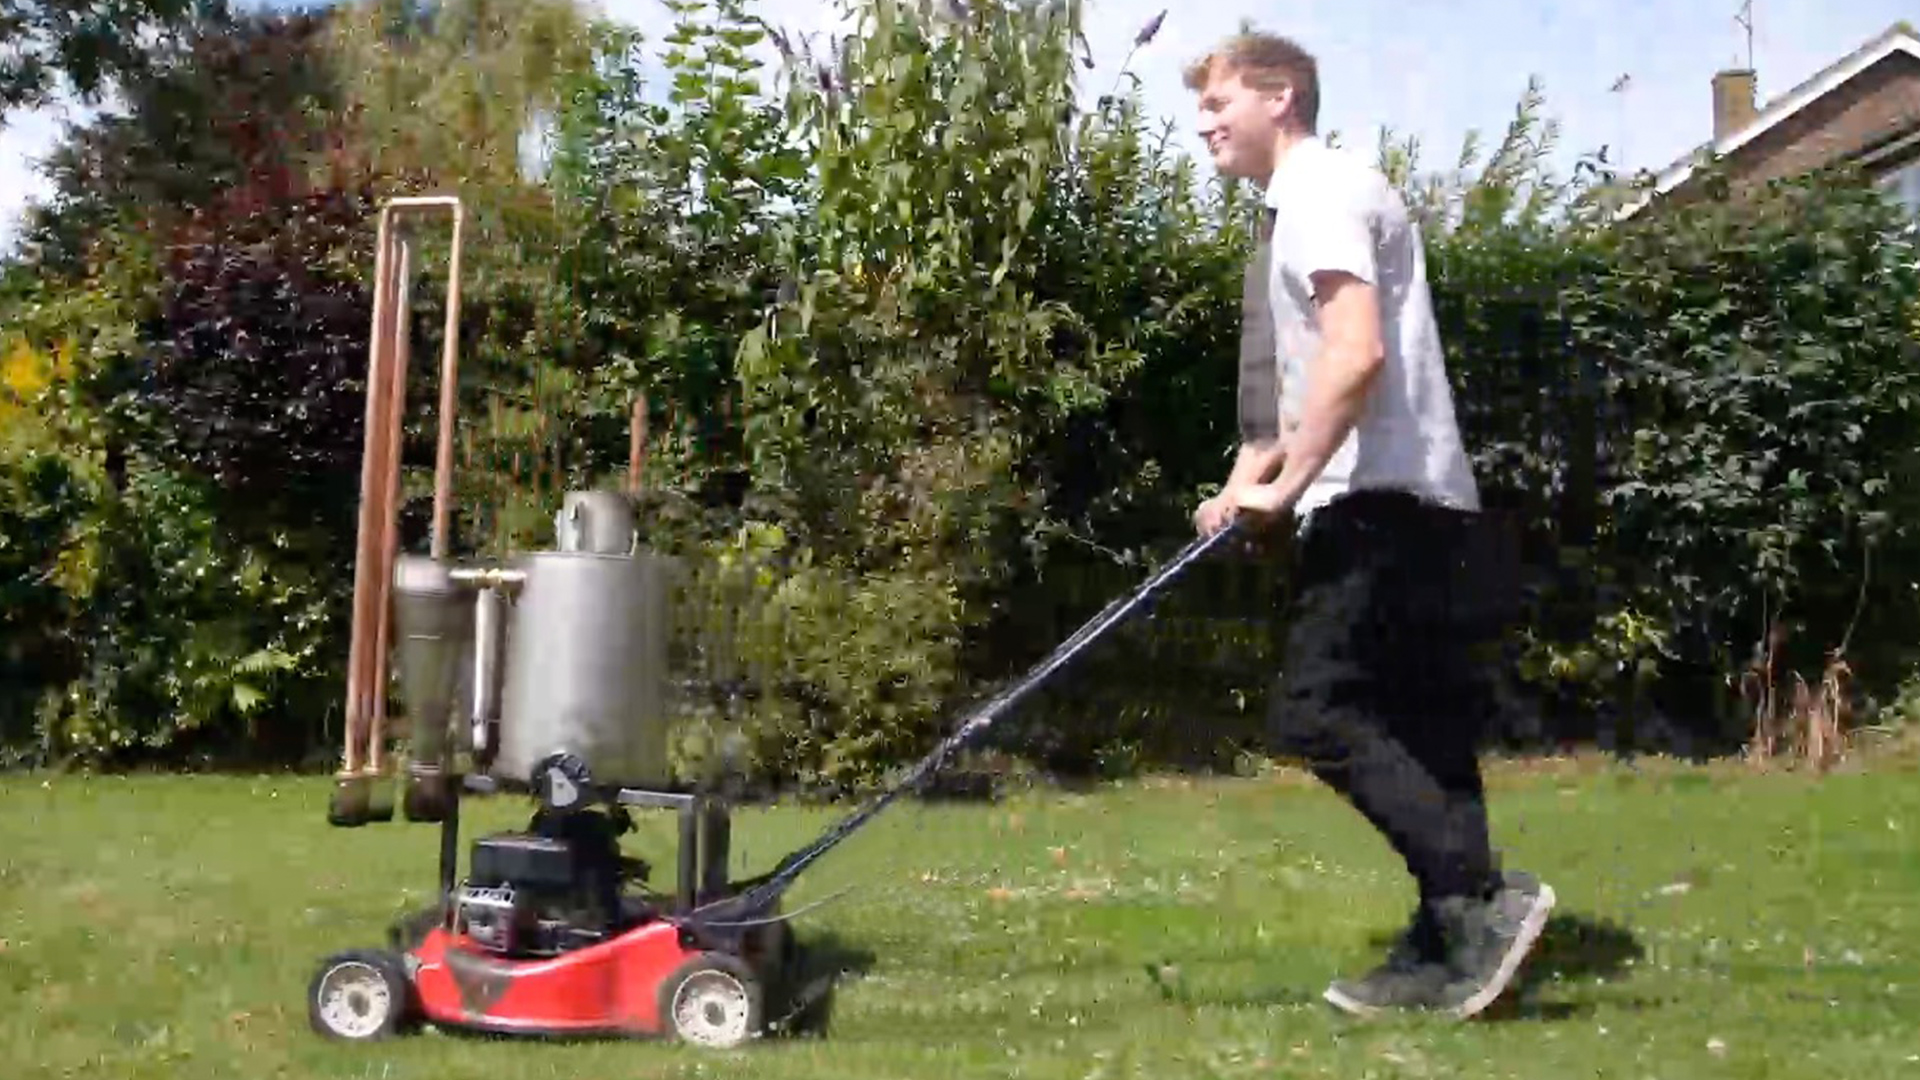 Notice Anything Unusual About Colin Furze's Lawn Mower? | RTM ...